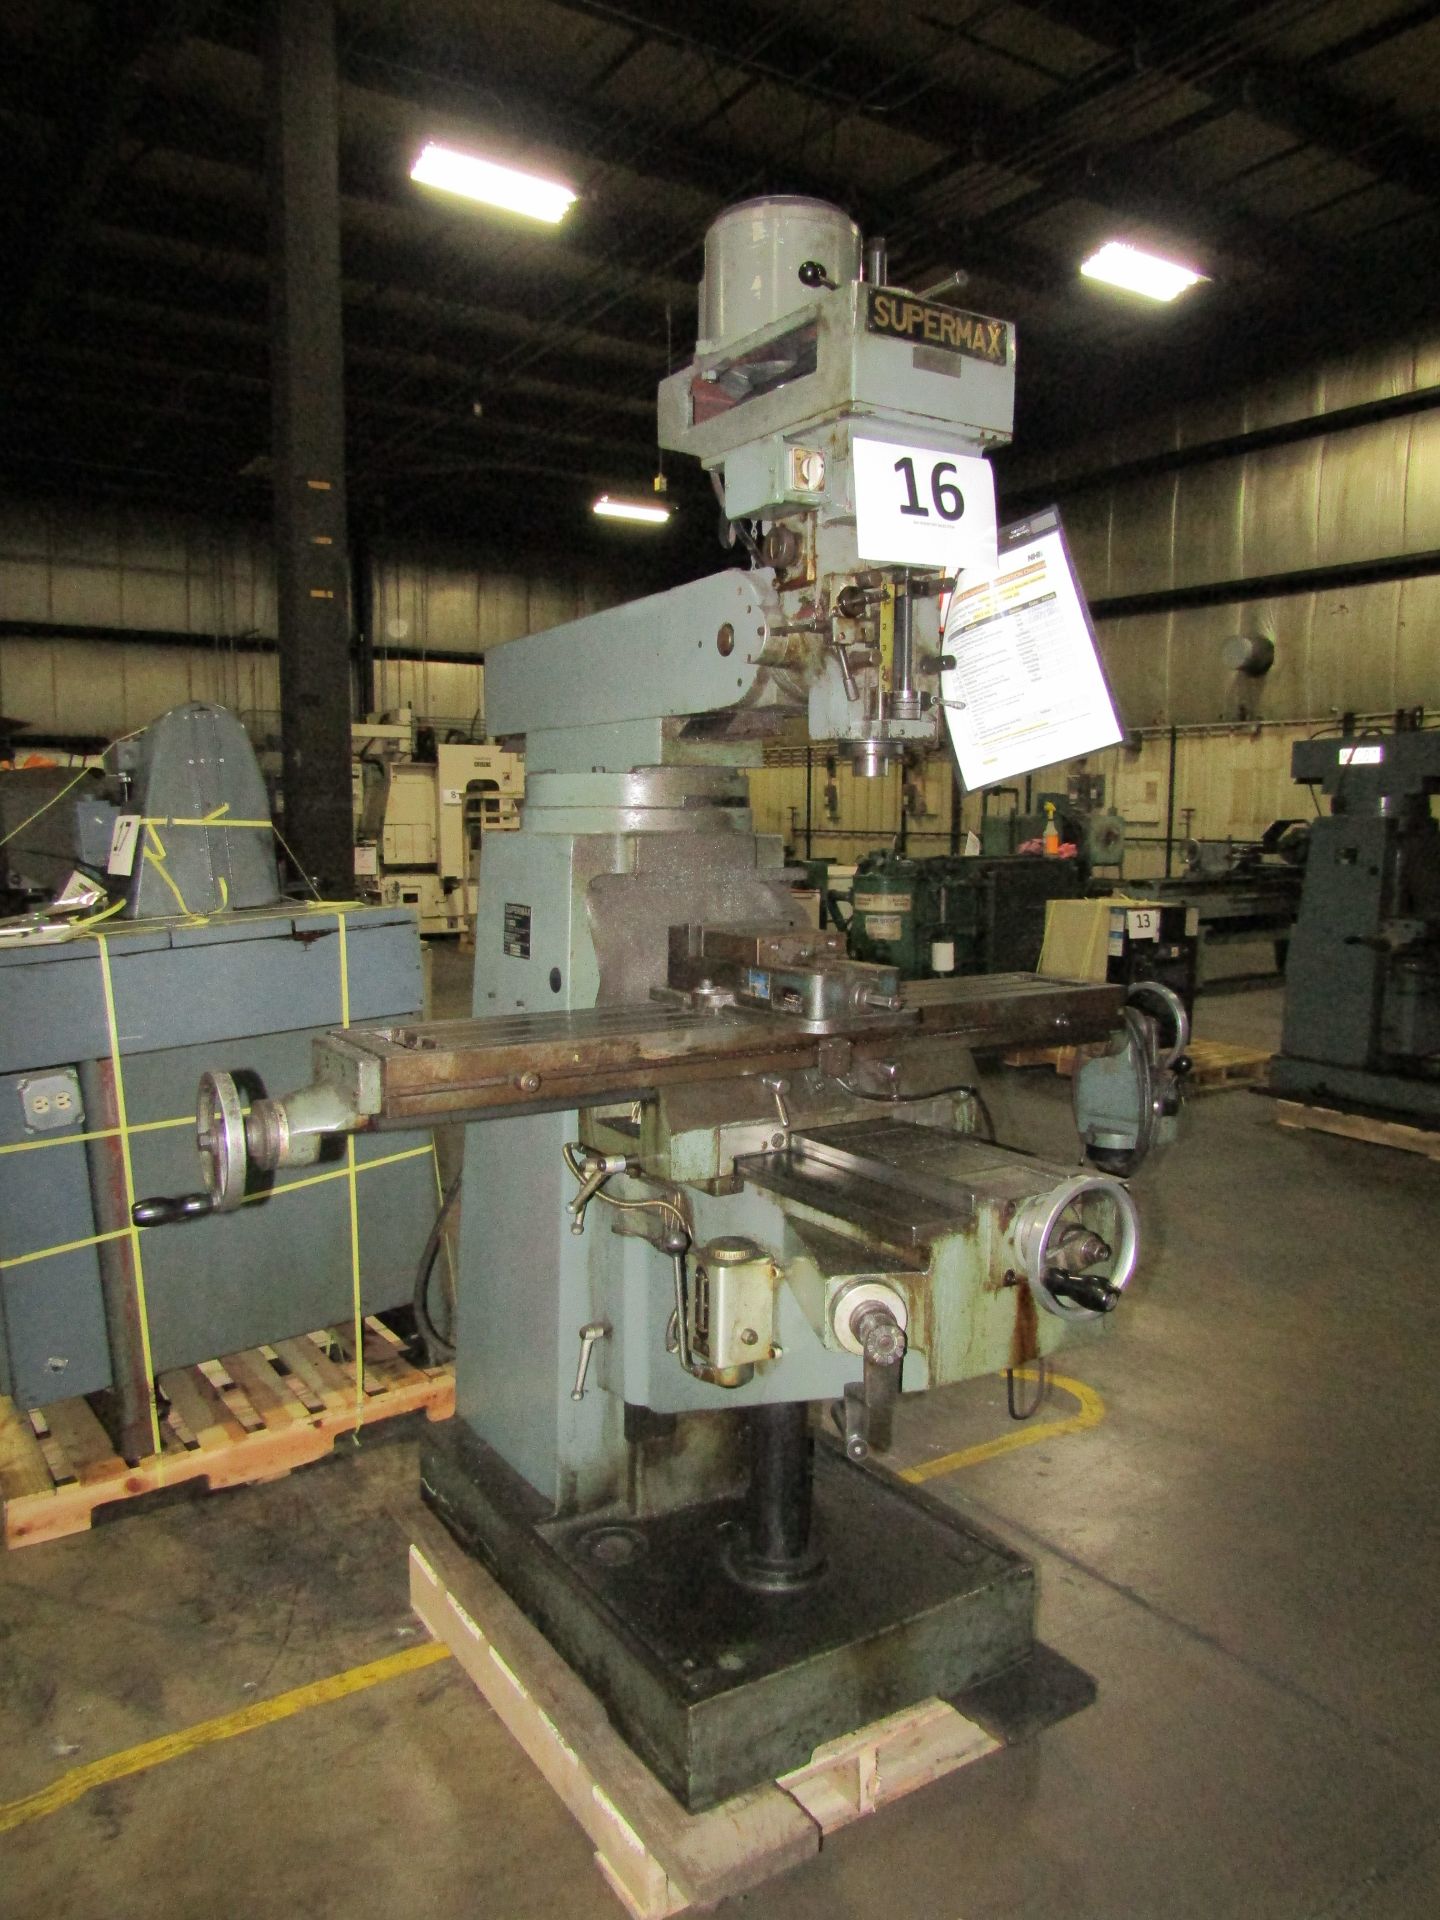 Supermax Vertical Mill M#: YCM-16VA S#: 1175 49 X 9 Power Table W/ Vise - Image 2 of 5